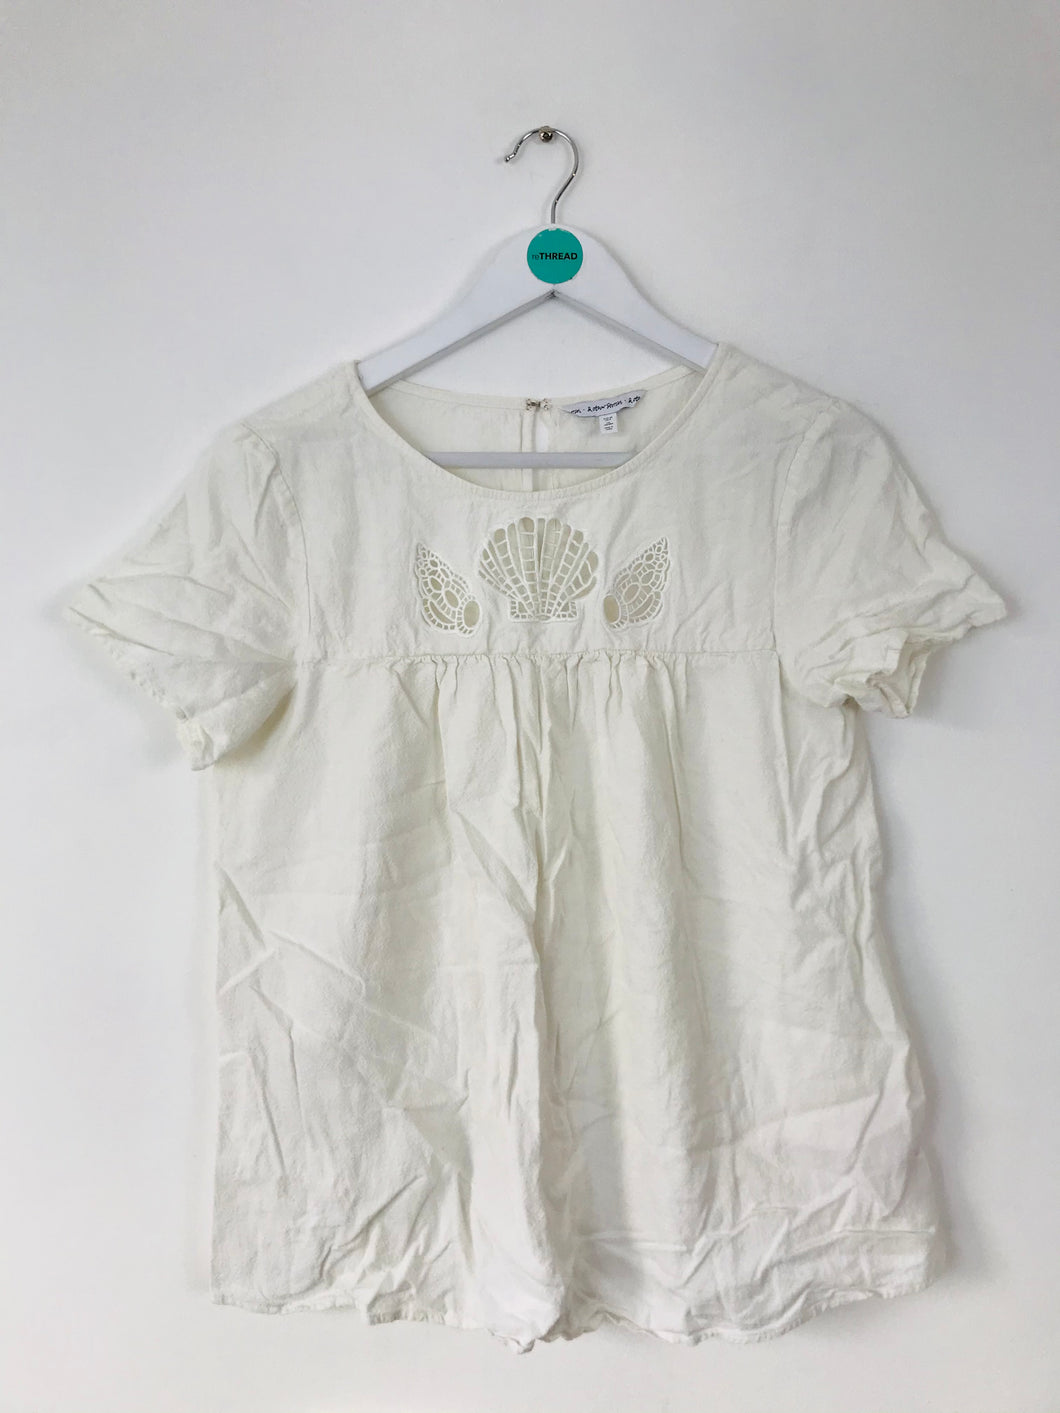 & Other Stories Women’s Smock Short Sleeve Blouse Top | 38 UK12 | White